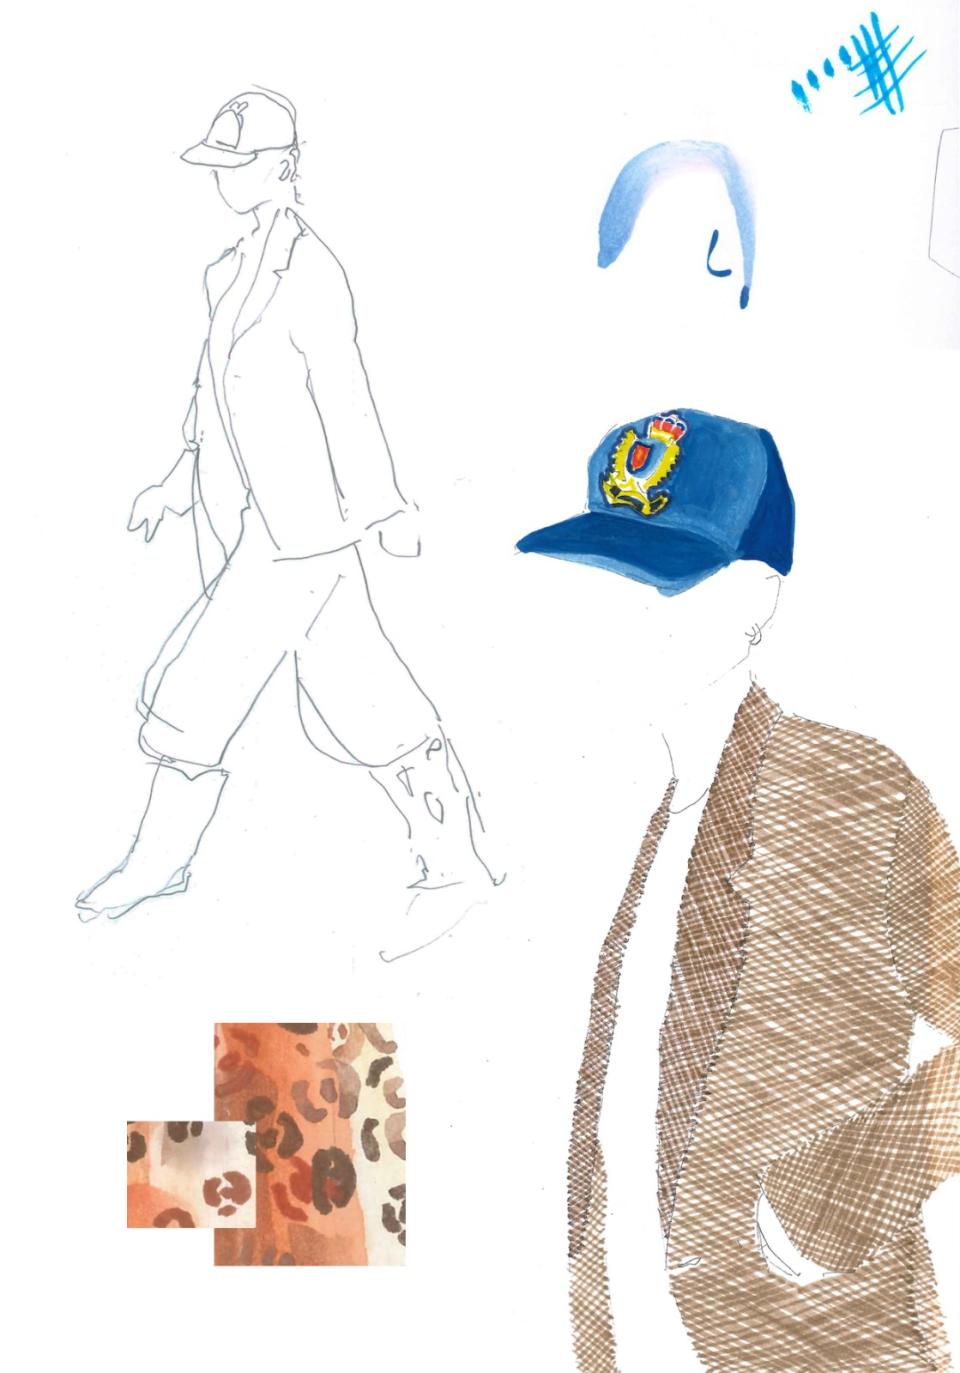 An idea for Princess Diana, conveying a more relatable side with a hat and work clothes